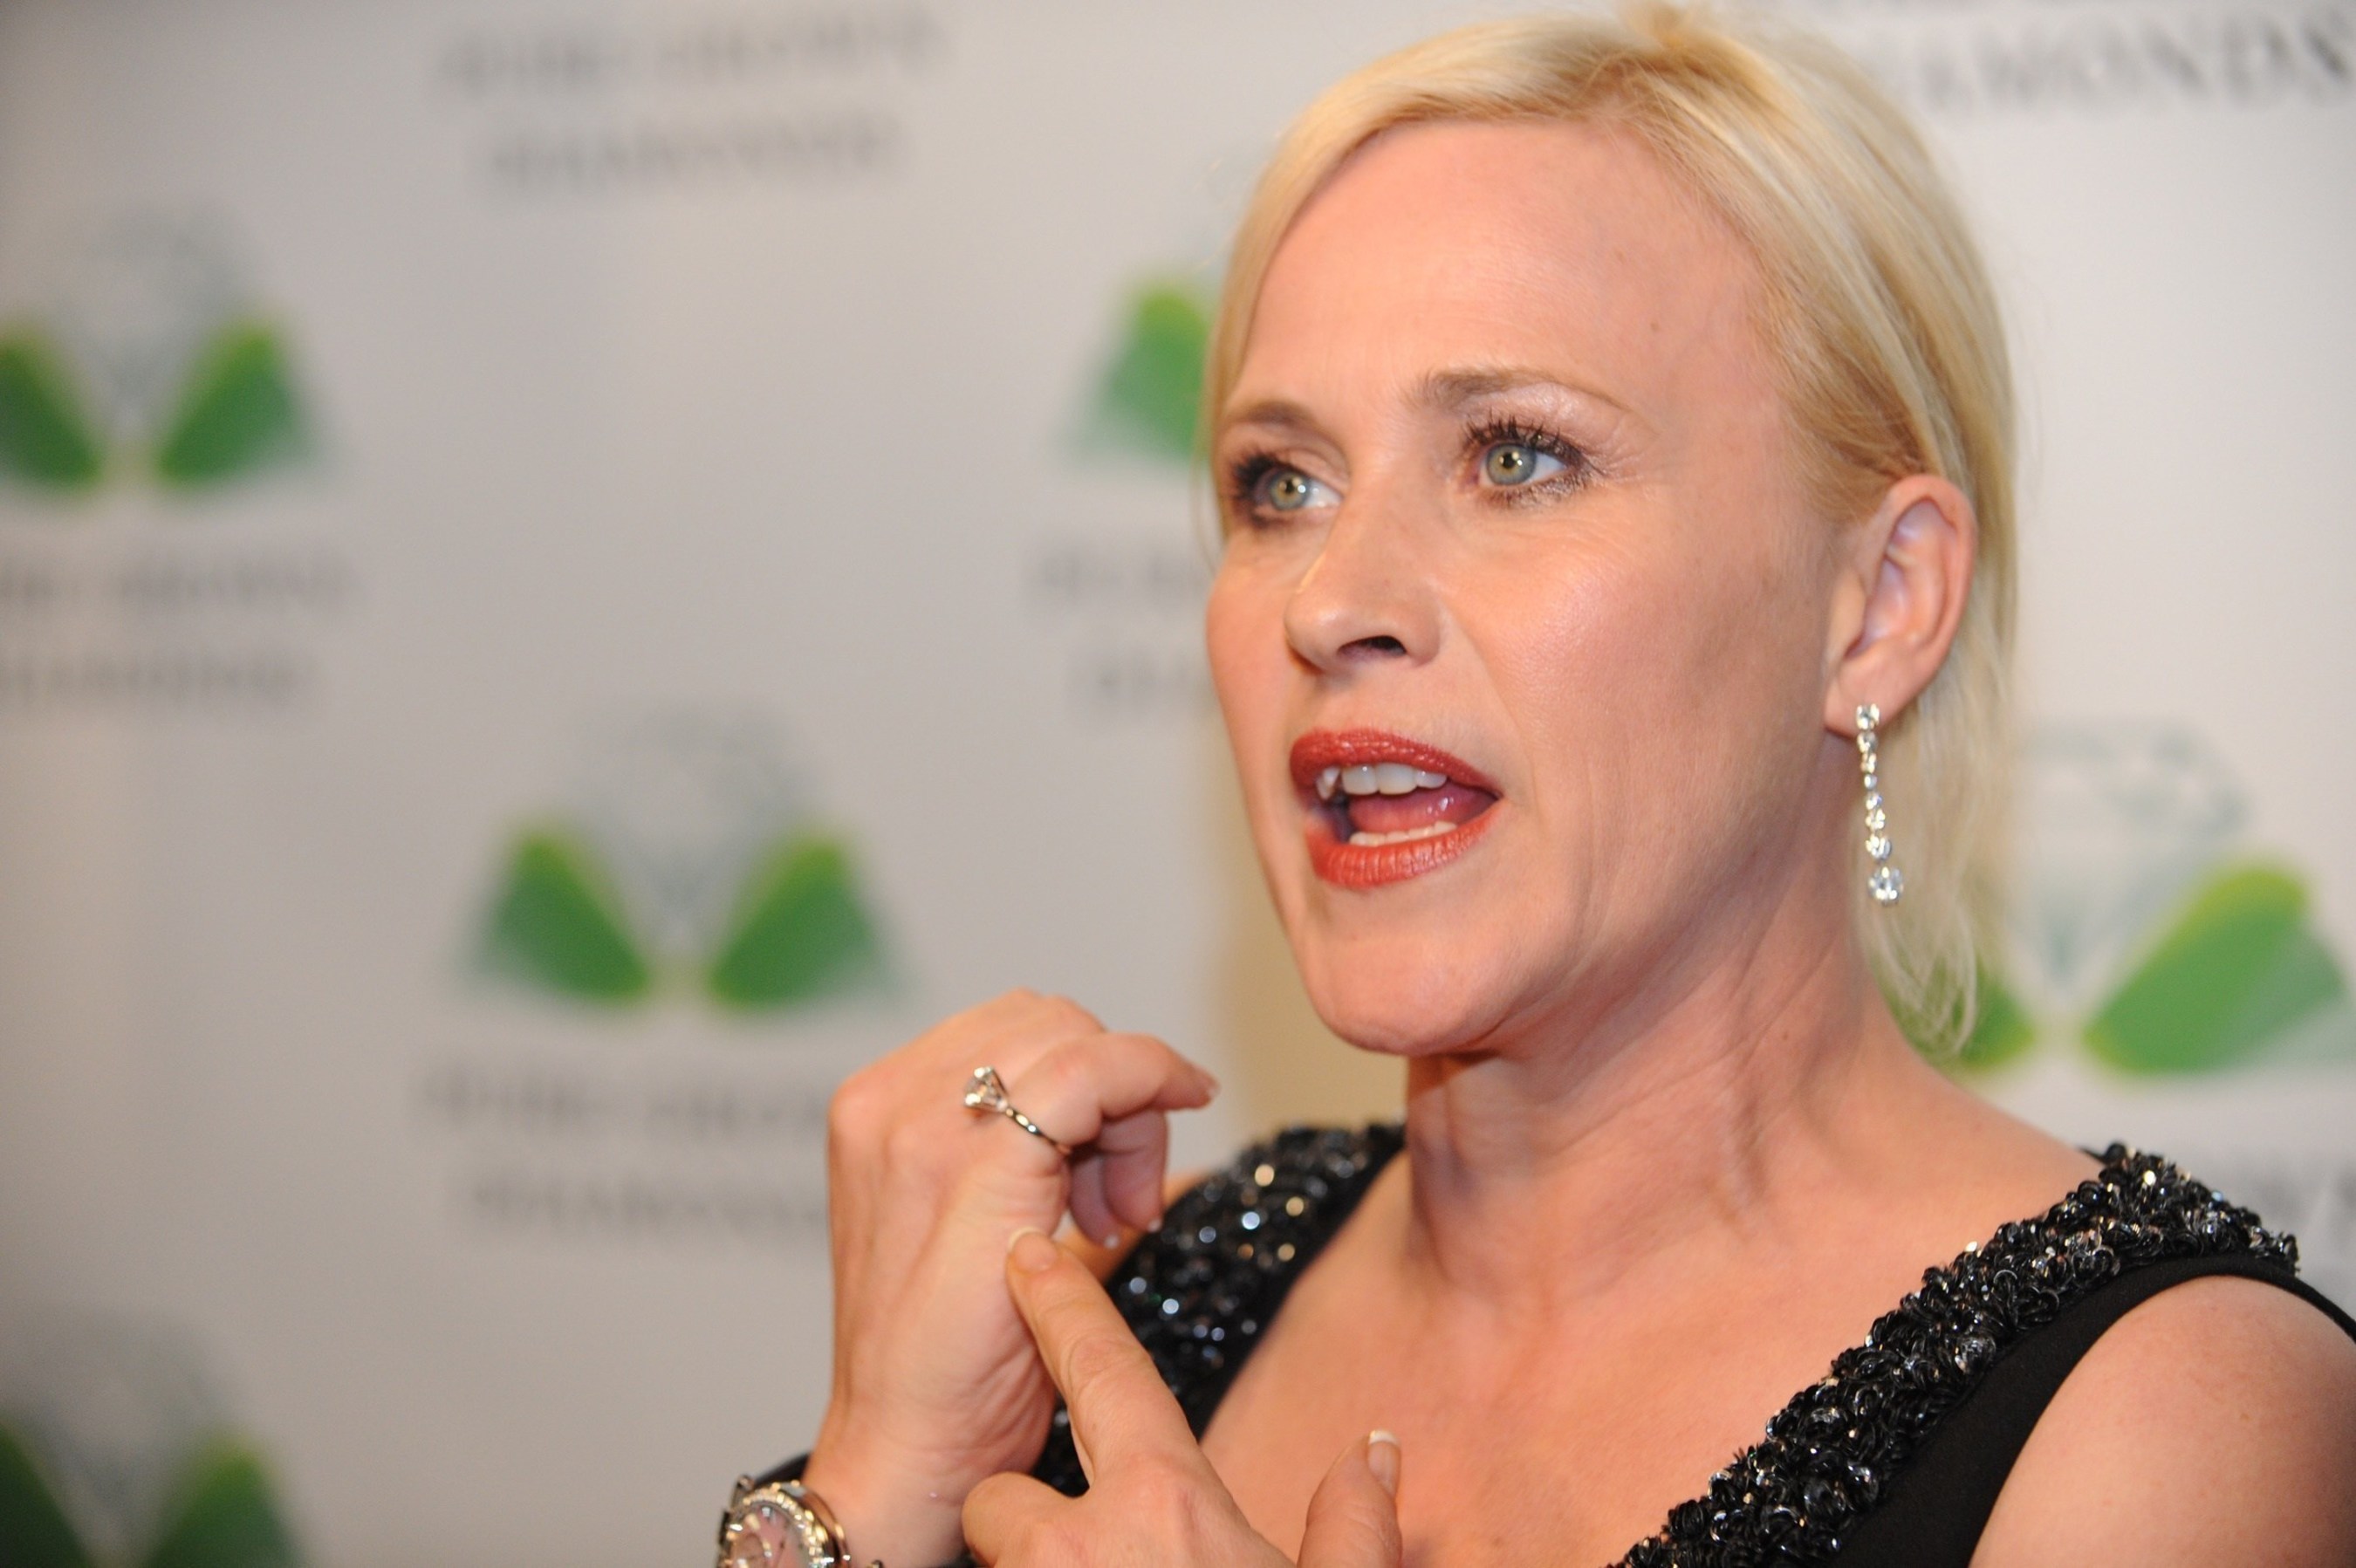 Academy Award Winner Patricia Arquette Previews World's Largest Laboratory-Cultivated Pure Grown Diamond - A 21st Century Marvel of Science.